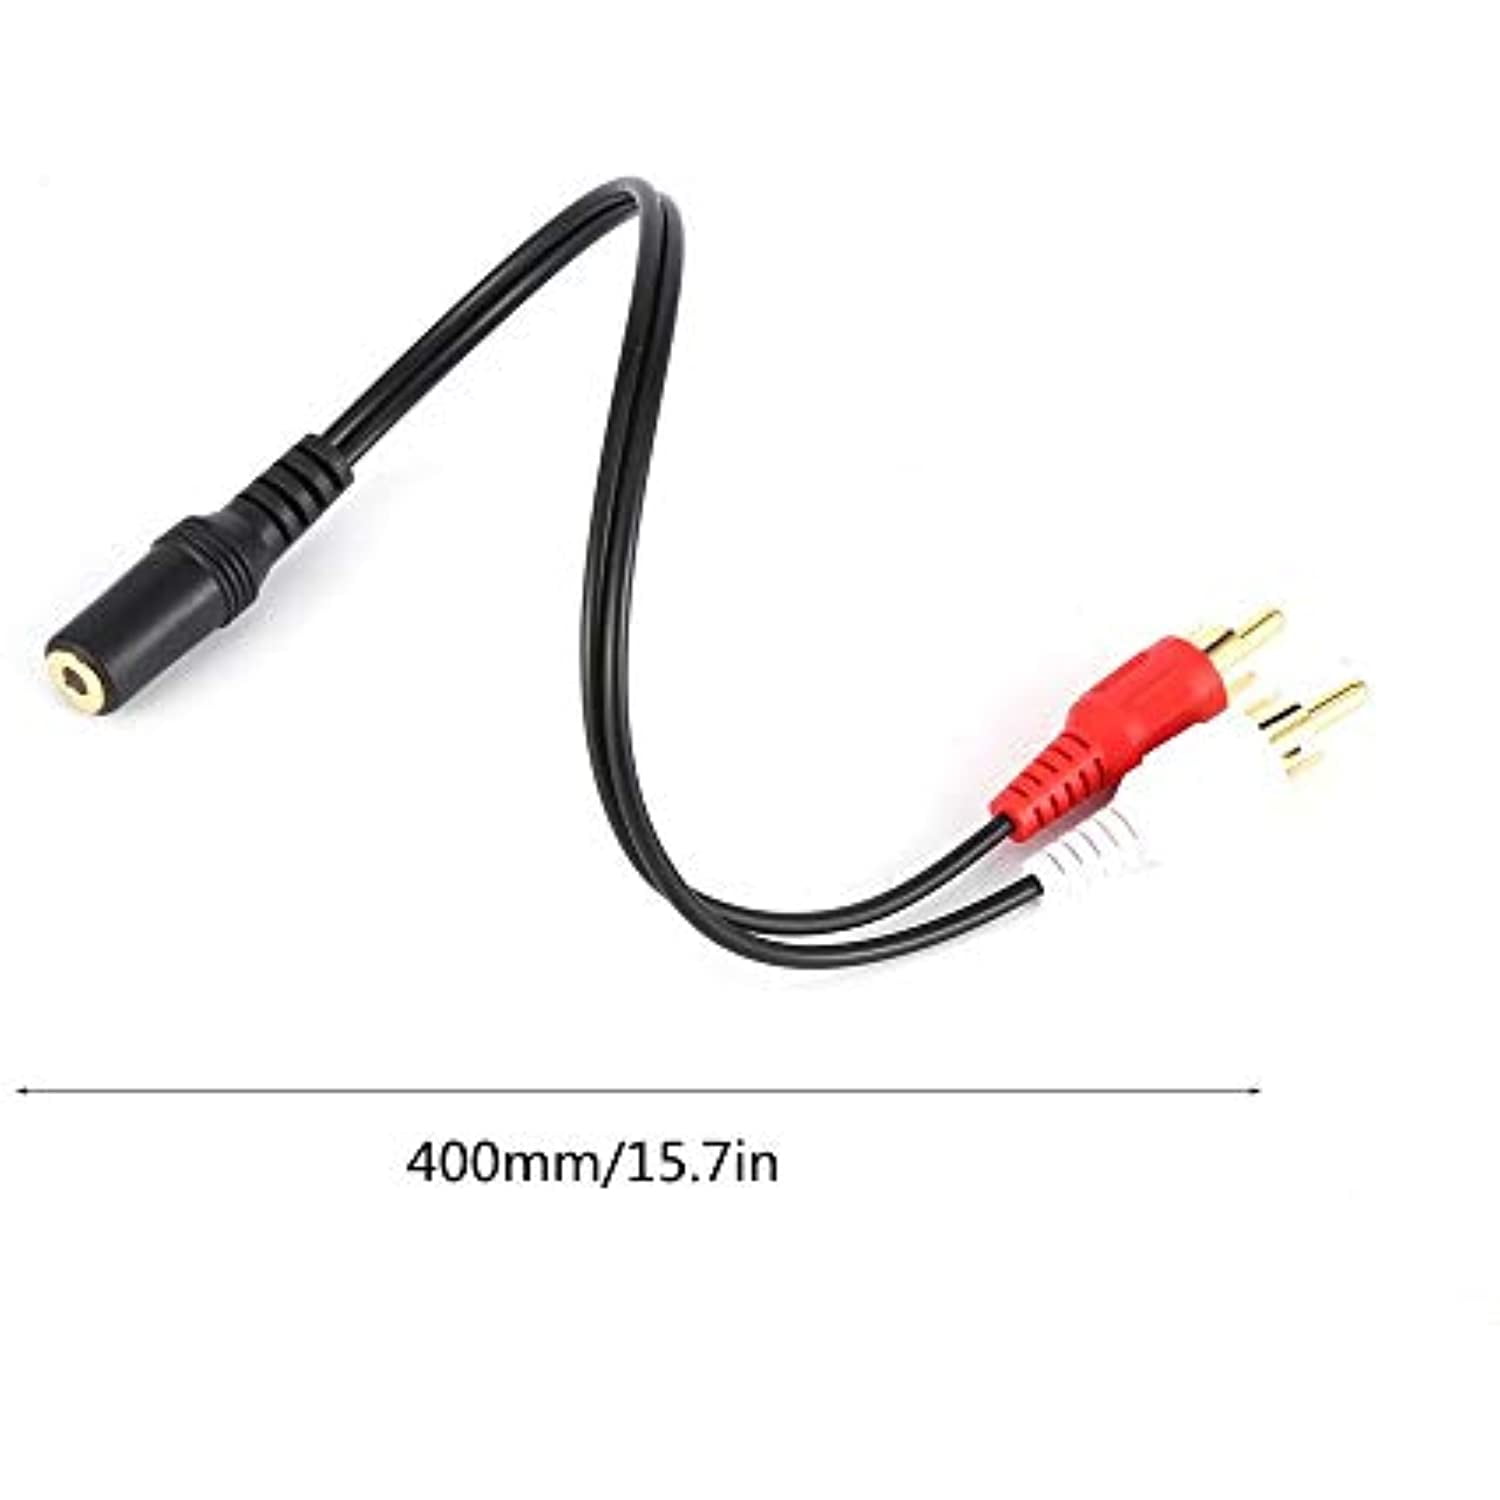 HiFi Stereo System Hosyl Gold Plated 3.5MM Female to 2 RCA Male Jack Stereo Audio Cable for iPhone MP3 Tablets iPad Computer Sound Speaker iPod 